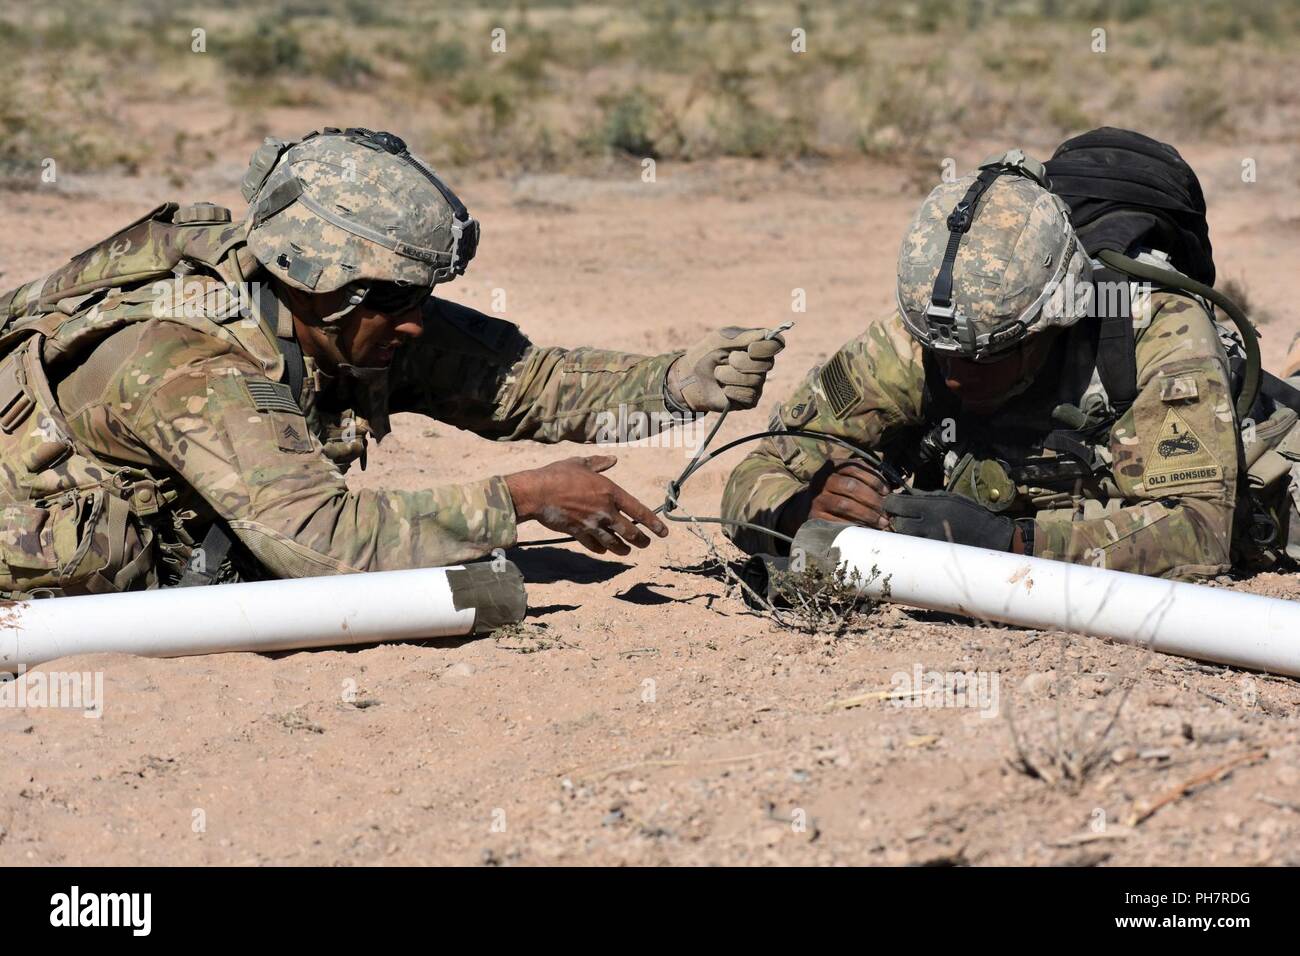 Sgt. Luis Mendez, left, and Staff Sgt. Barjona Ray, assigned to the 16th Brigade Engineer Battalion, 1st Stryker Brigade Combat Team, 1st Armored Division, assist Company C, 4th Battalion, 17th Infantry Regiment, by setting up a simulated Bangalore Torpedo charge as Soldiers practice breaching through an obstacle at the Malakhand training village, Orogrande Range Complex, N.M., June 24, 2018. Stock Photo